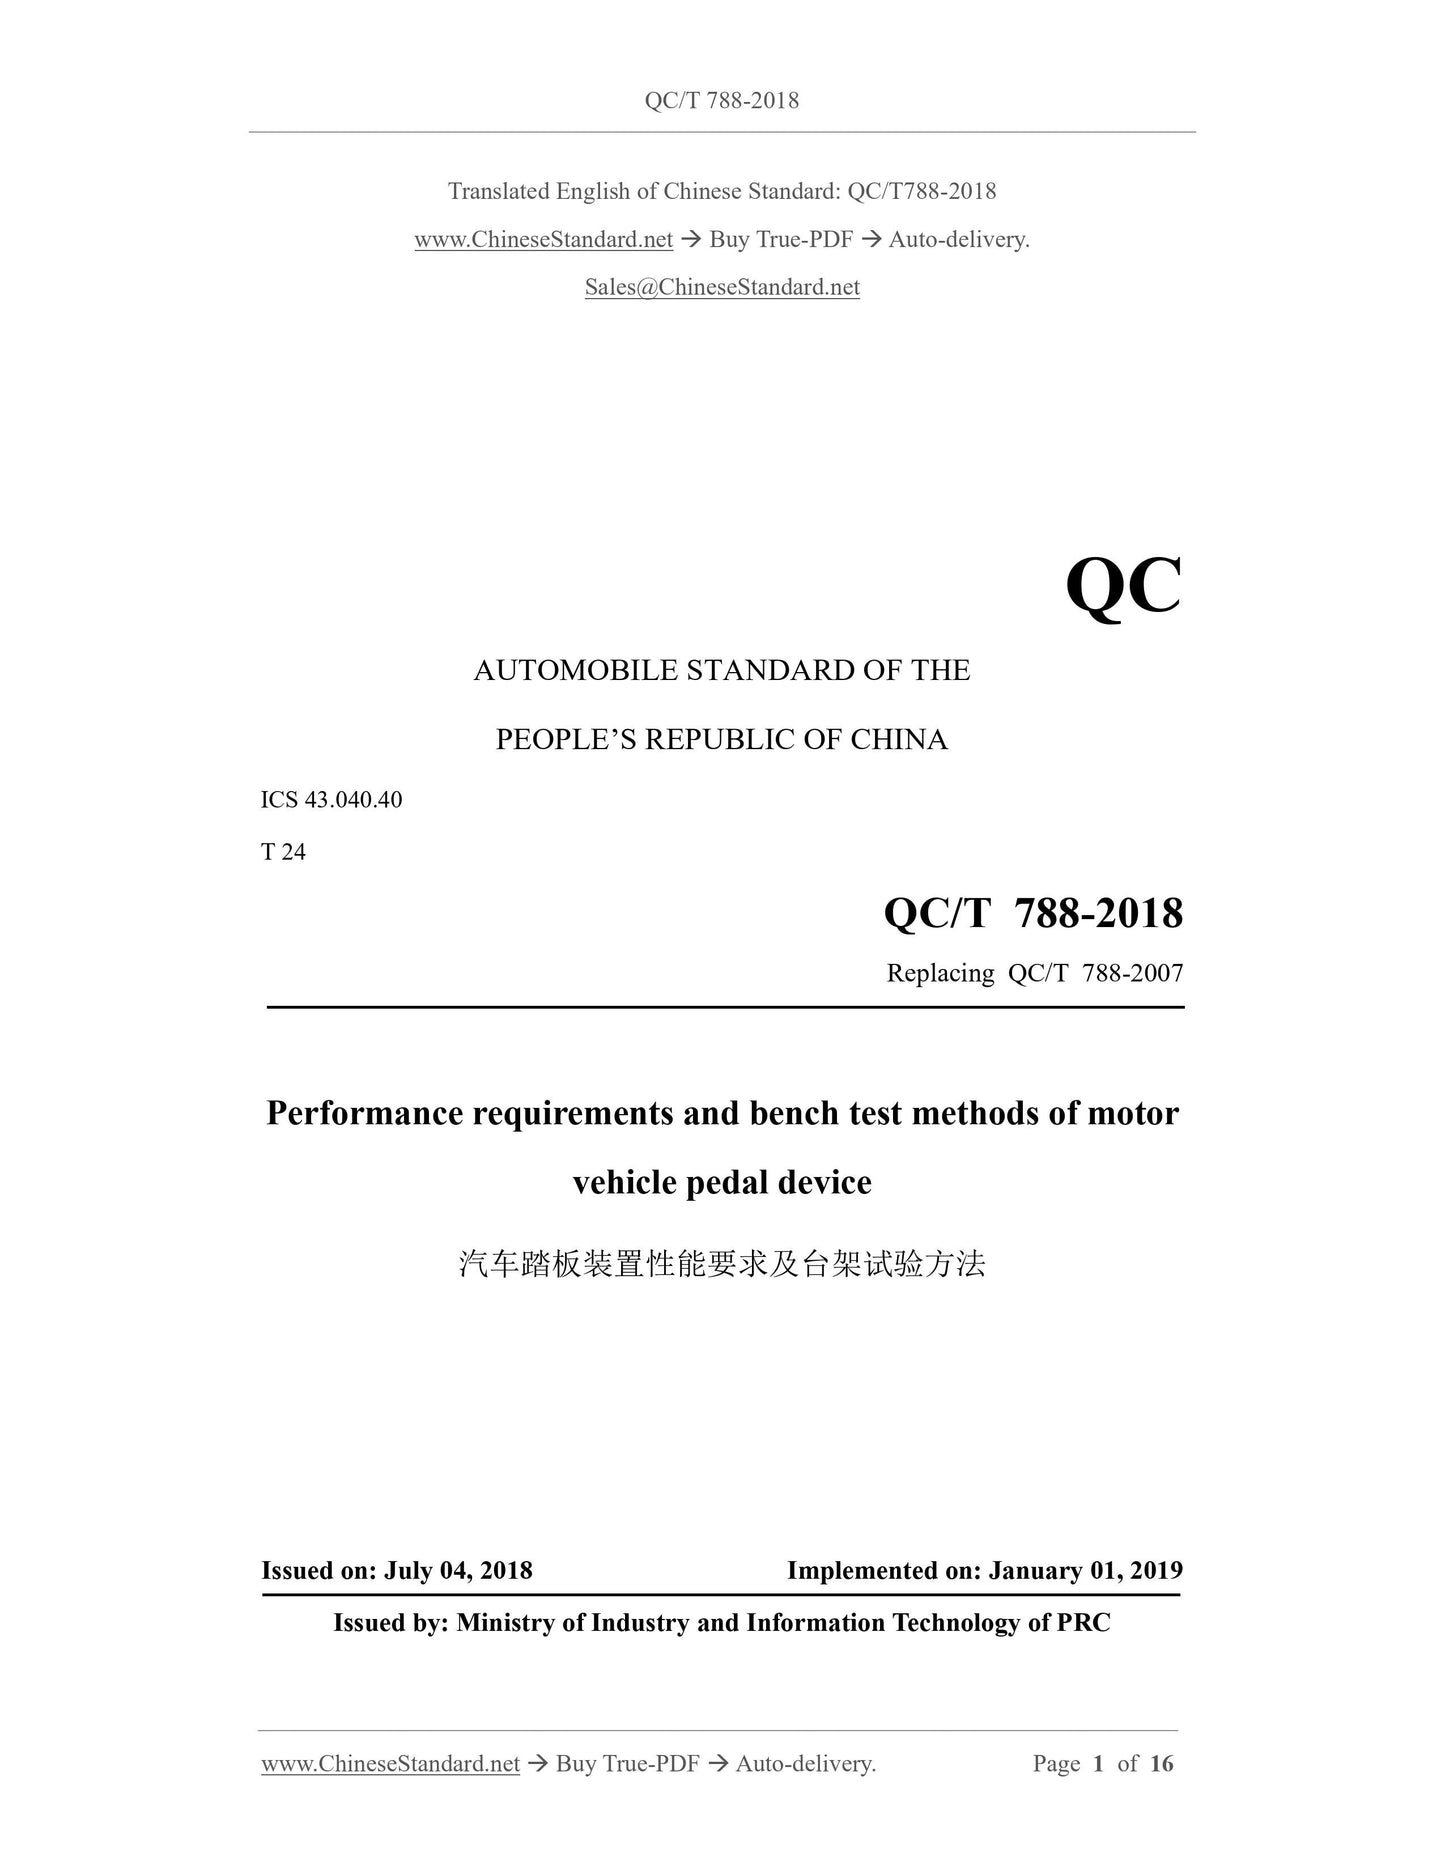 QC/T 788-2018 Page 1